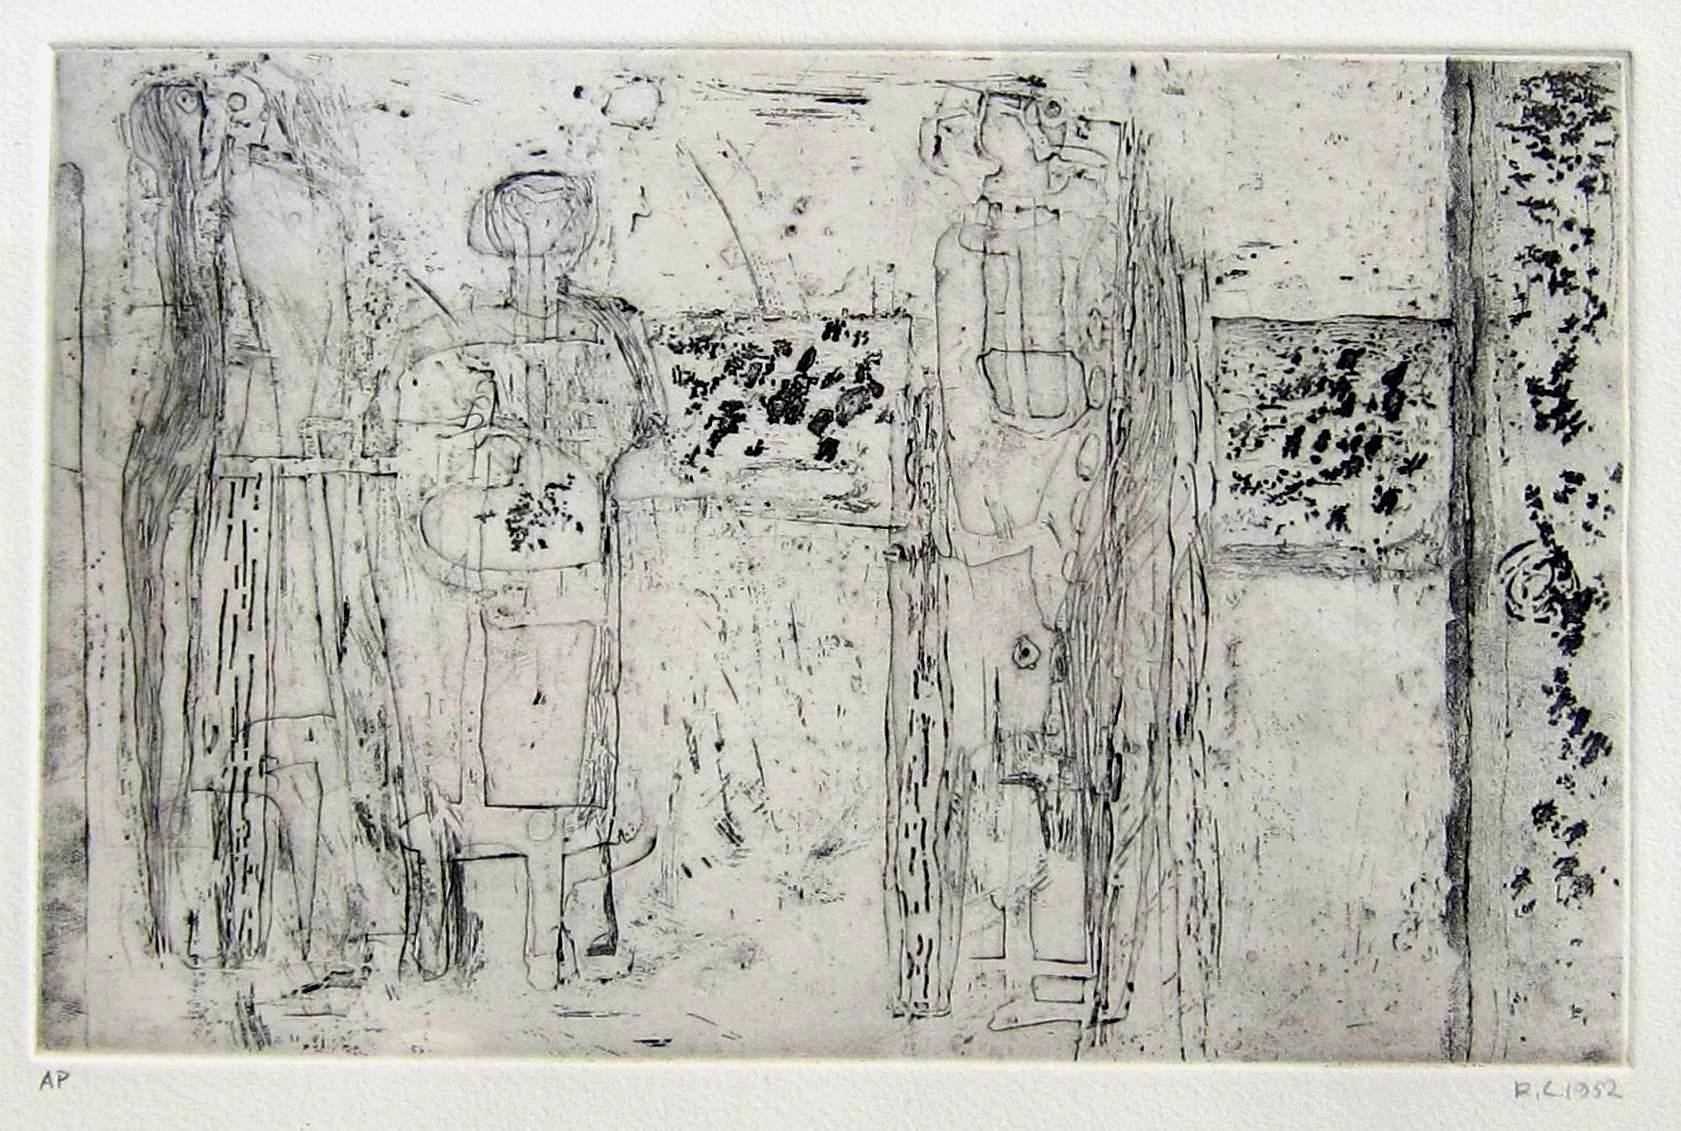 ROBERT CLATWORTHY, R.A. [1928-2015]. Figures, 1952. Etching, edition of 50, artist's proof - very